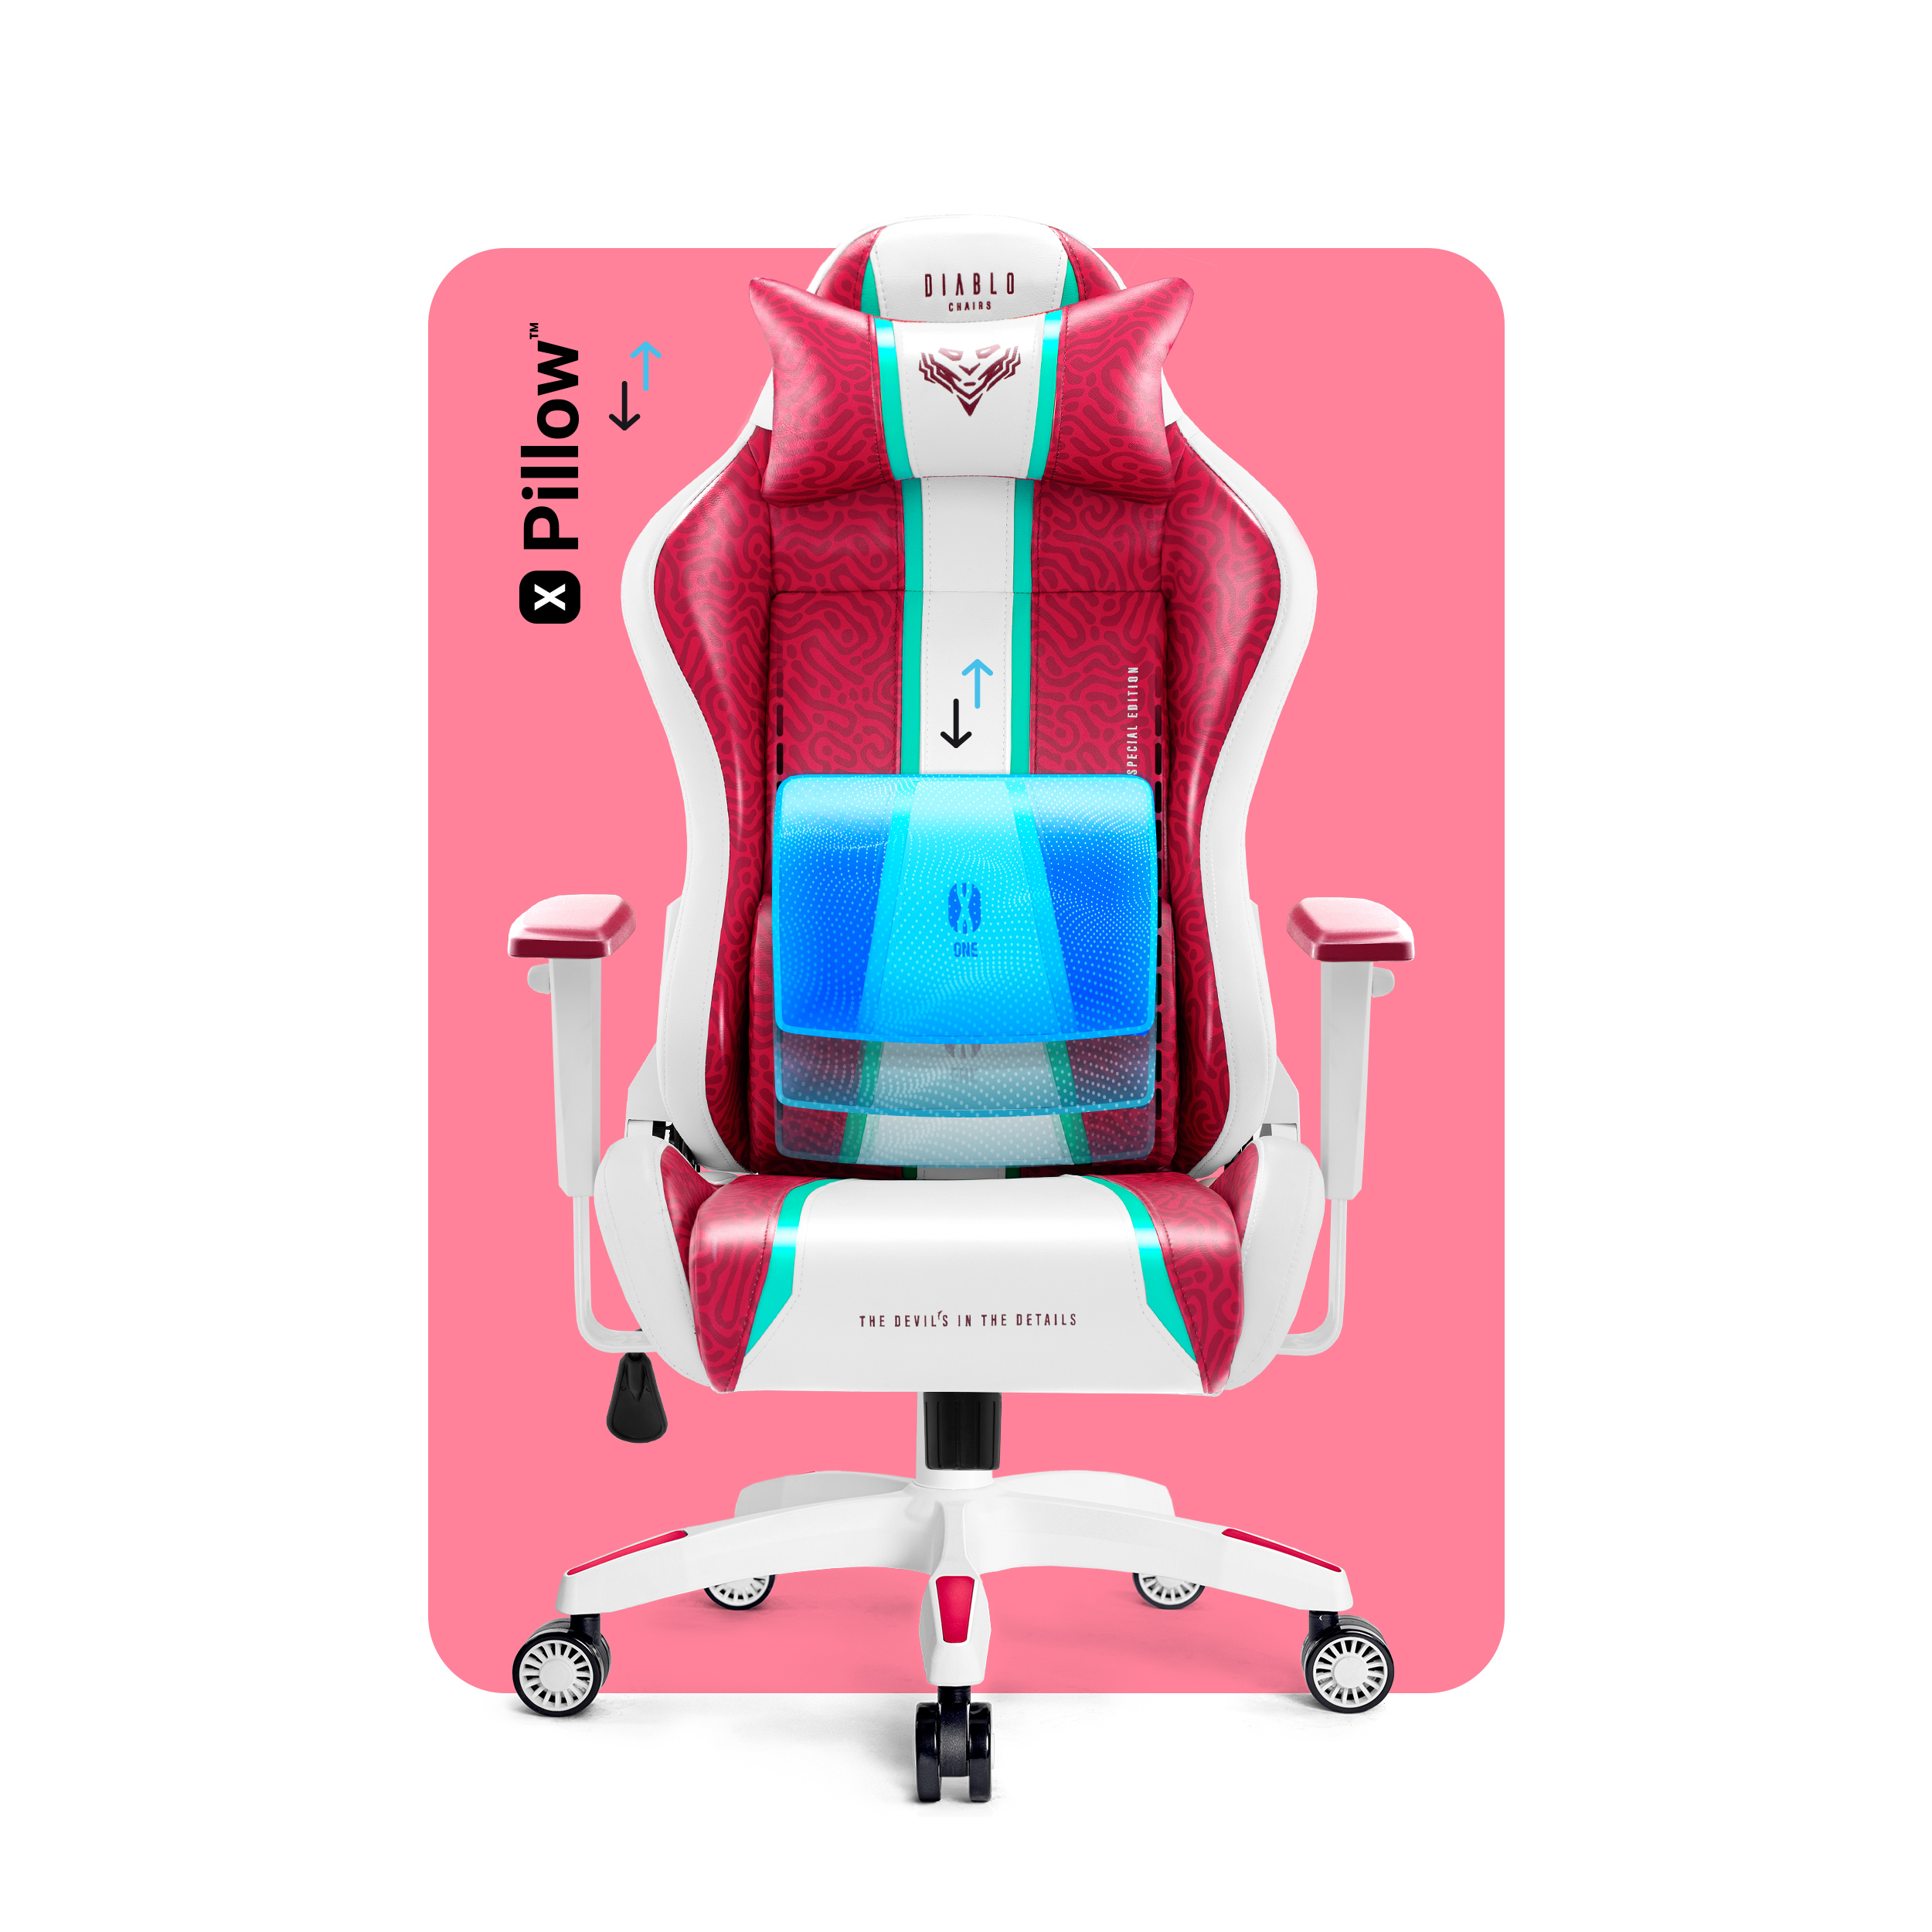 DIABLO CHAIRS CANDY X-ONE Stuhl, Rosa 2.0 NORMAL Gaming